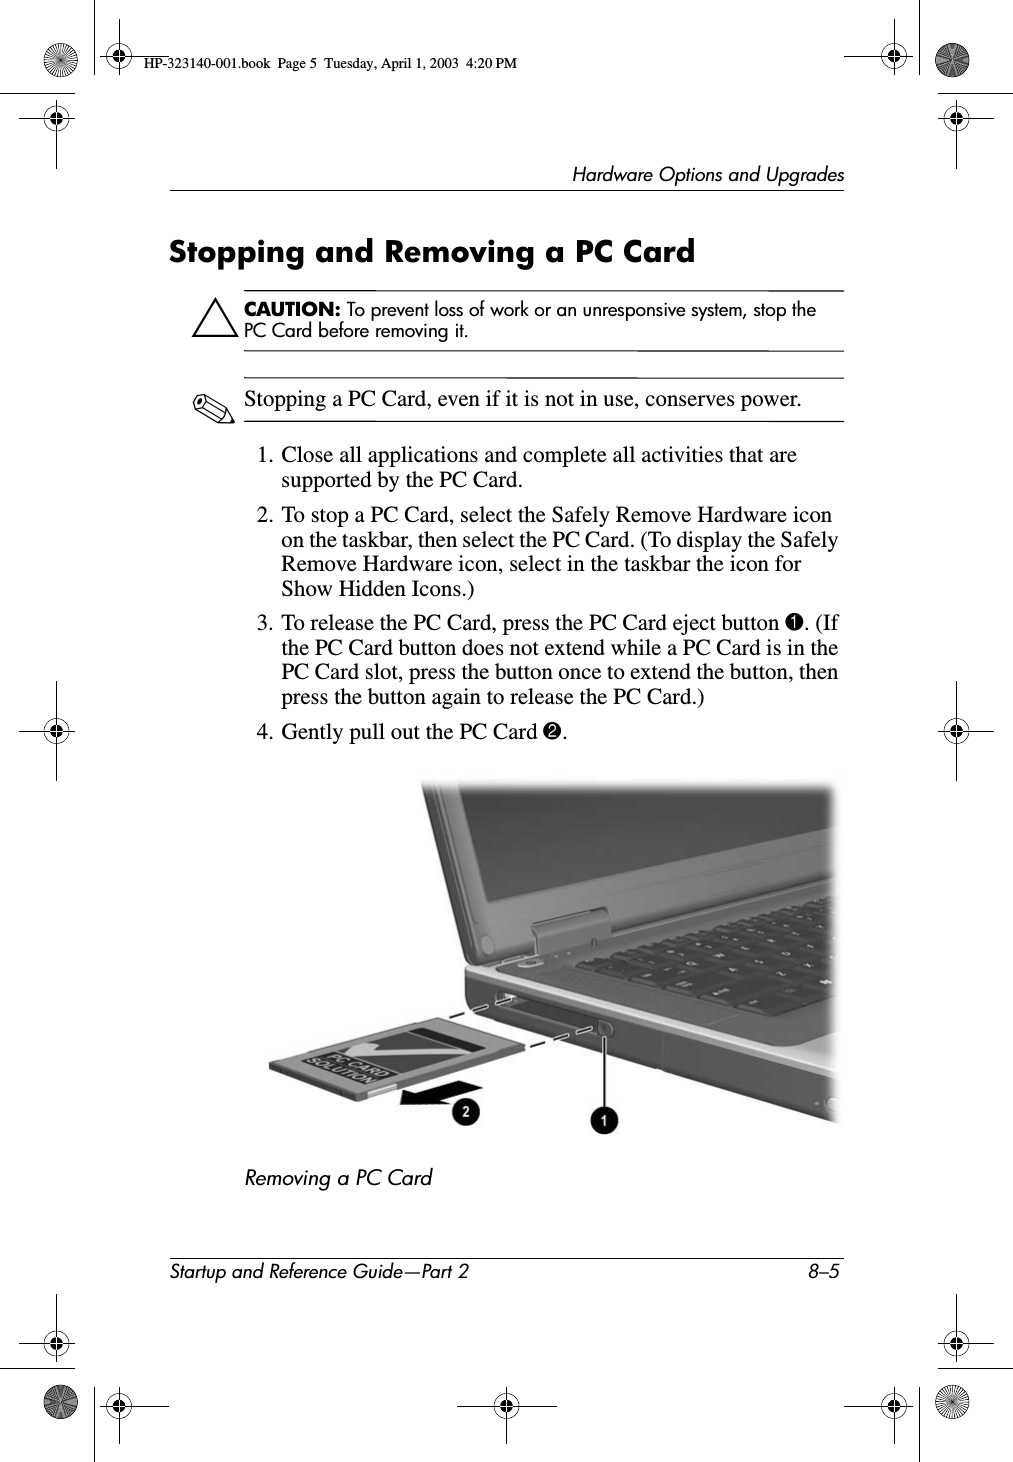 Hardware Options and UpgradesStartup and Reference Guide—Part 2 8–5Stopping and Removing a PC CardÄCAUTION: To prevent loss of work or an unresponsive system, stop the PC Card before removing it.✎Stopping a PC Card, even if it is not in use, conserves power.1. Close all applications and complete all activities that are supported by the PC Card.2. To stop a PC Card, select the Safely Remove Hardware icon on the taskbar, then select the PC Card. (To display the Safely Remove Hardware icon, select in the taskbar the icon for Show Hidden Icons.)3. To release the PC Card, press the PC Card eject button 1. (If the PC Card button does not extend while a PC Card is in the PC Card slot, press the button once to extend the button, then press the button again to release the PC Card.)4. Gently pull out the PC Card 2.Removing a PC Card HP-323140-001.book  Page 5  Tuesday, April 1, 2003  4:20 PM